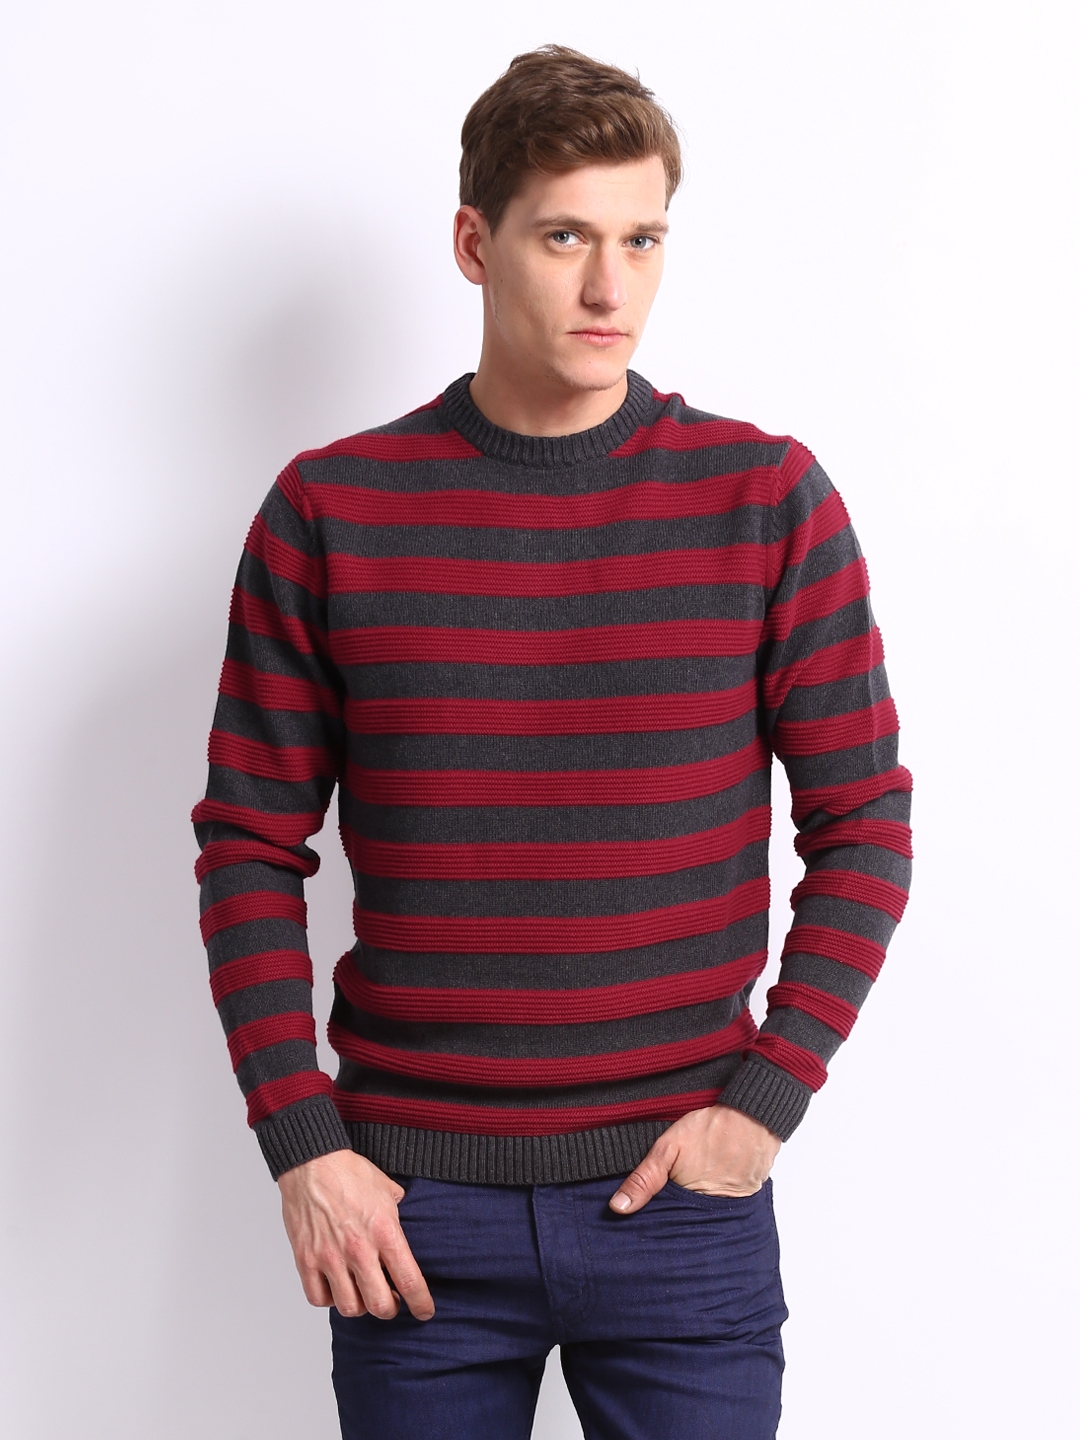 Buy Levis Men Charcoal Grey & Red Striped Sweater - Sweaters for Men 204708  | Myntra